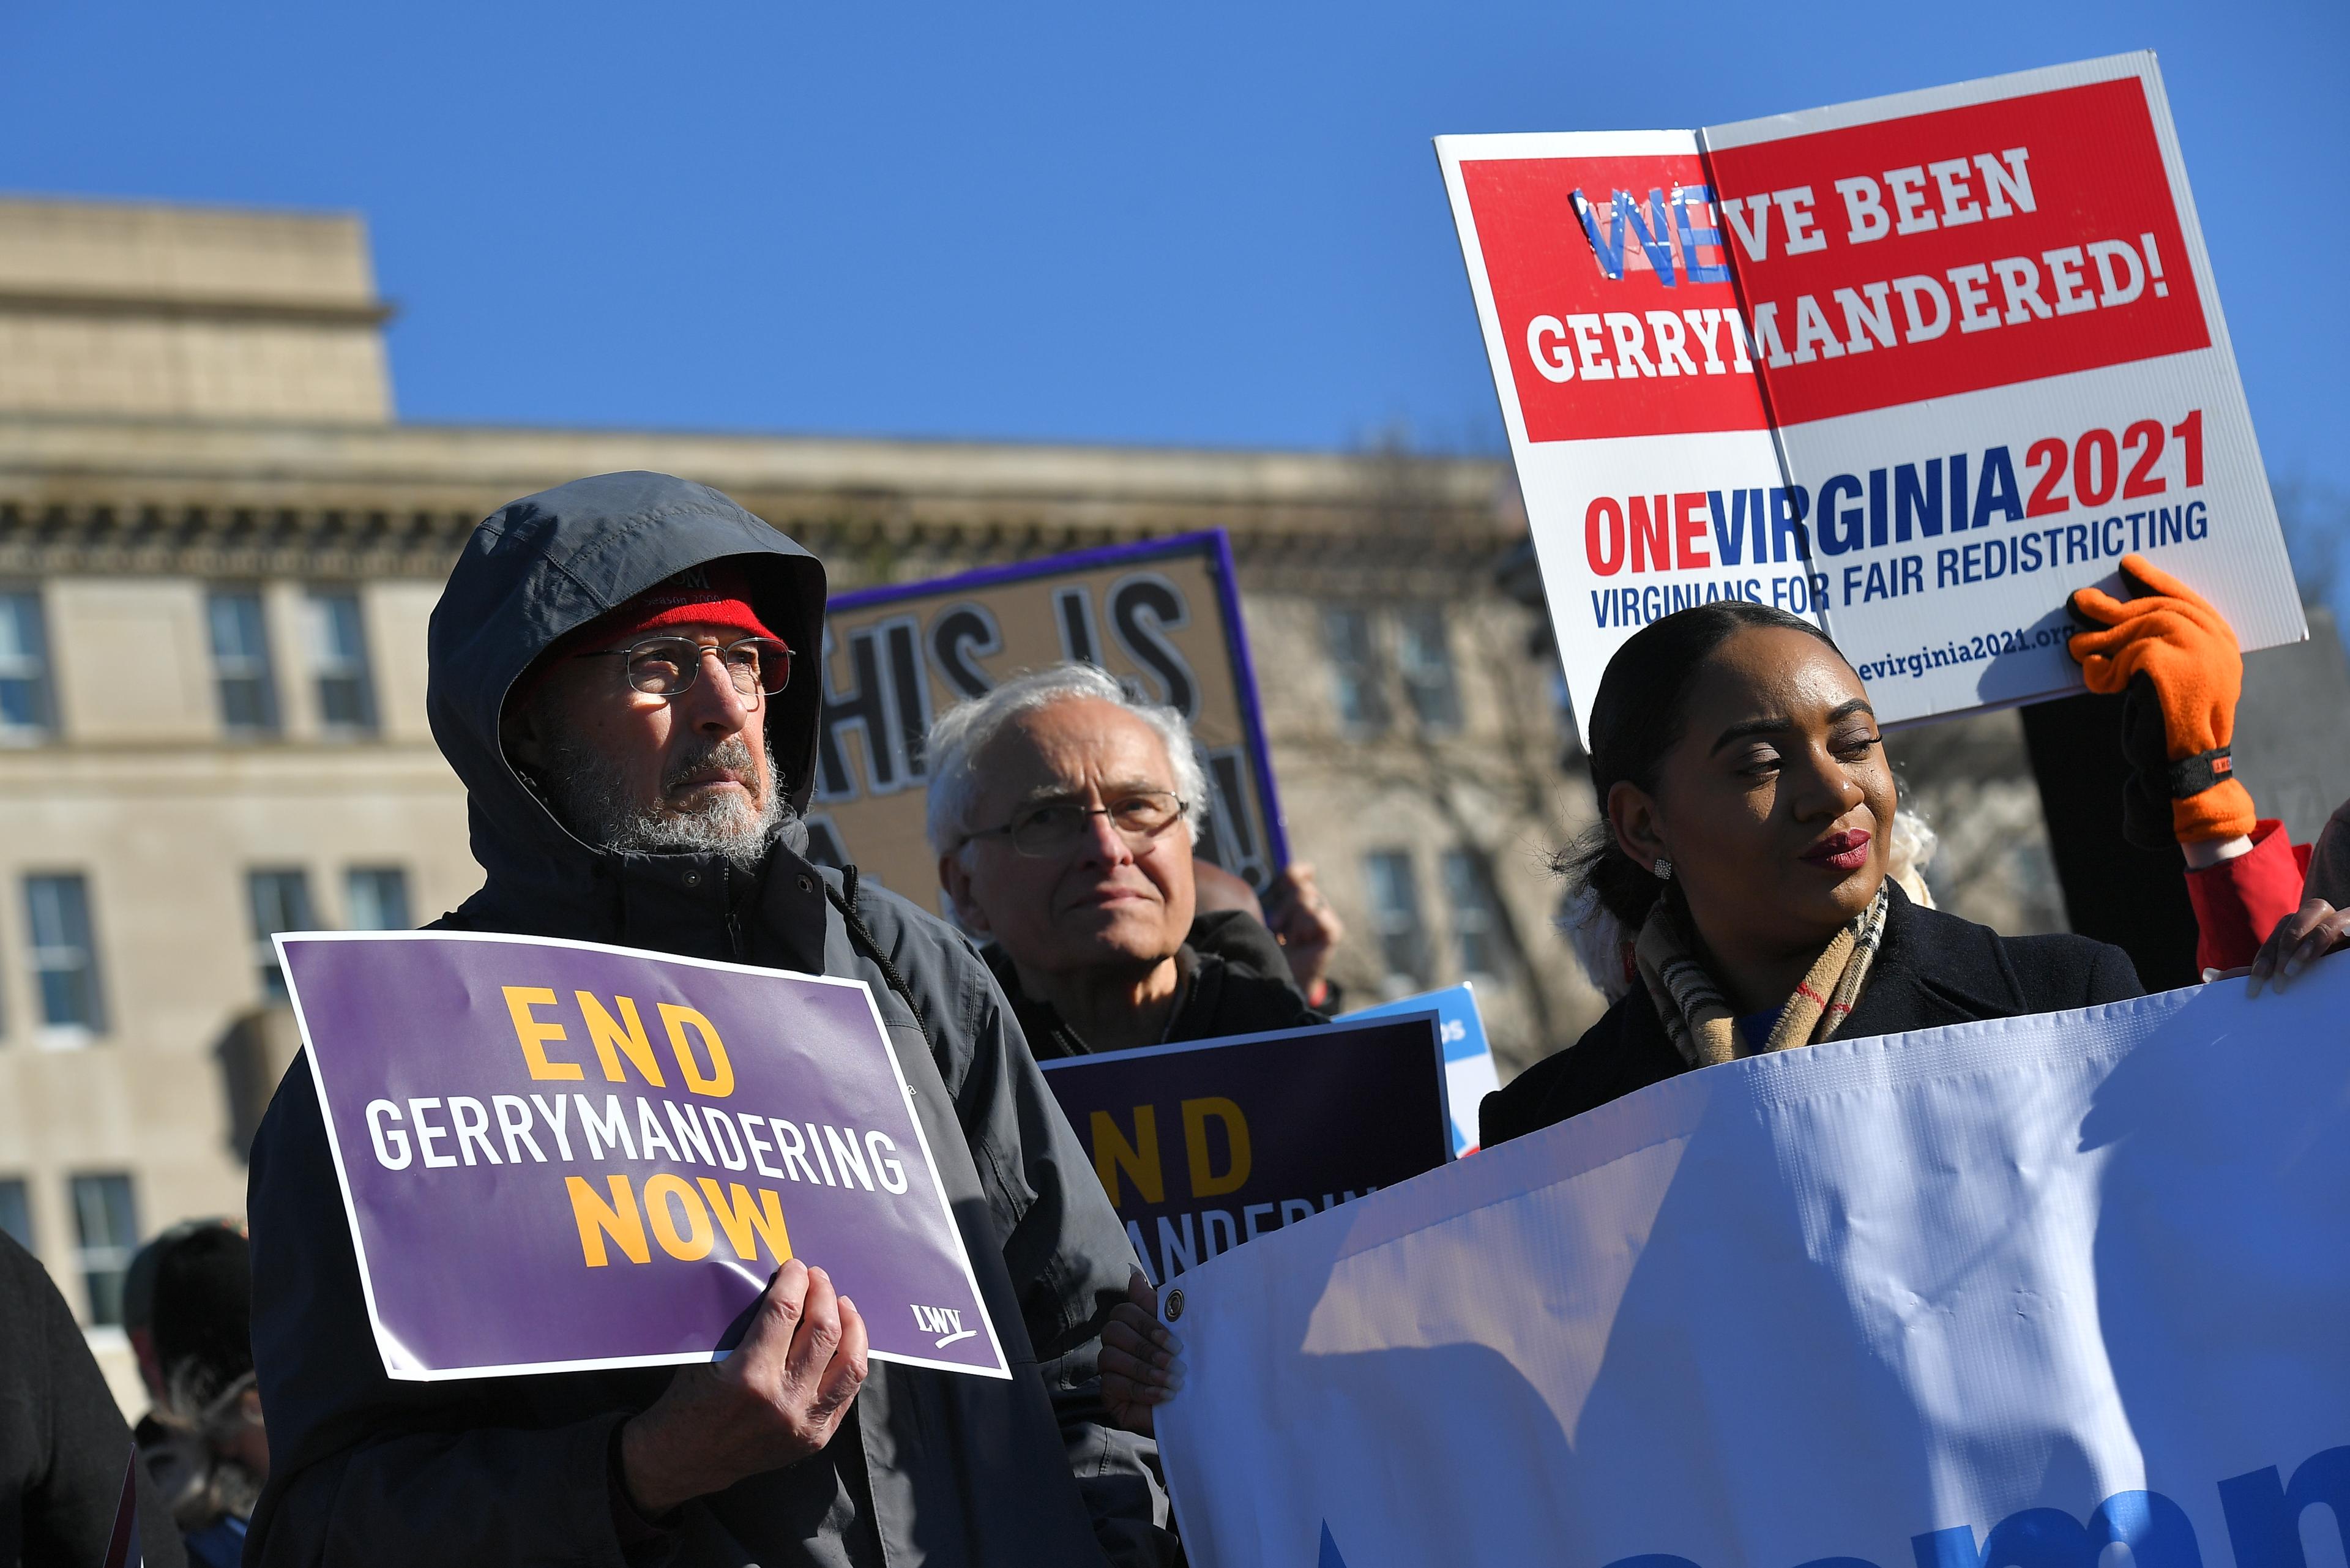 People gather during a rally to coincide with the Supreme Court hearings on the redistricting cases in Maryland and North Carolina, in front of the US Supreme Court in Washington, DC on March 26, 2019. - The US Supreme Court is set Tuesday to once more hear arguments on gerrymandering, the dark art of redrawing political boundaries to extract partisan advantage: a practice that is almost as old as the country itself. The latest cases to come before the highest bench are from North Carolina, where Republican lawmakers are accused of devising electoral maps to favor themselves; and Maryland, where Democrats are accused of the same. (Photo by MANDEL NGAN / AFP)